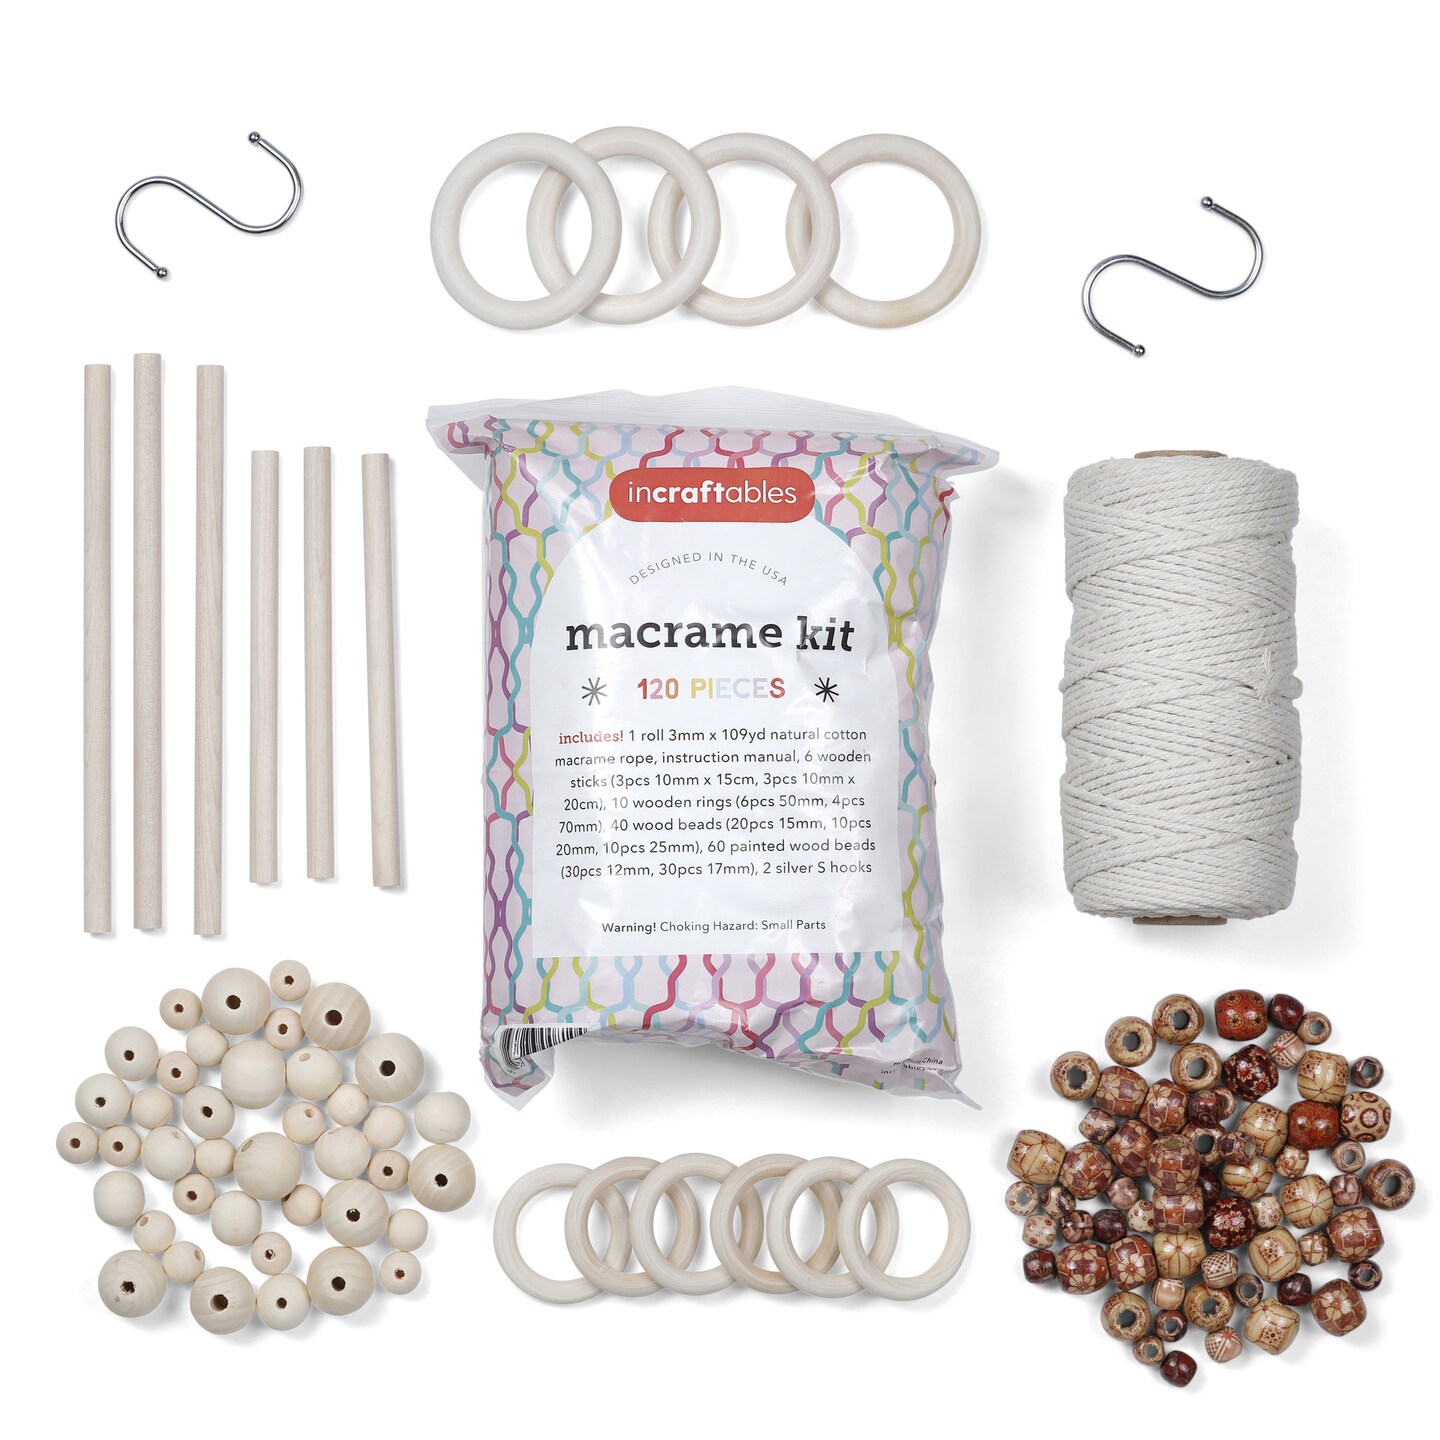 Craft kits for adults: Candle making, soap making, macrame, knitting